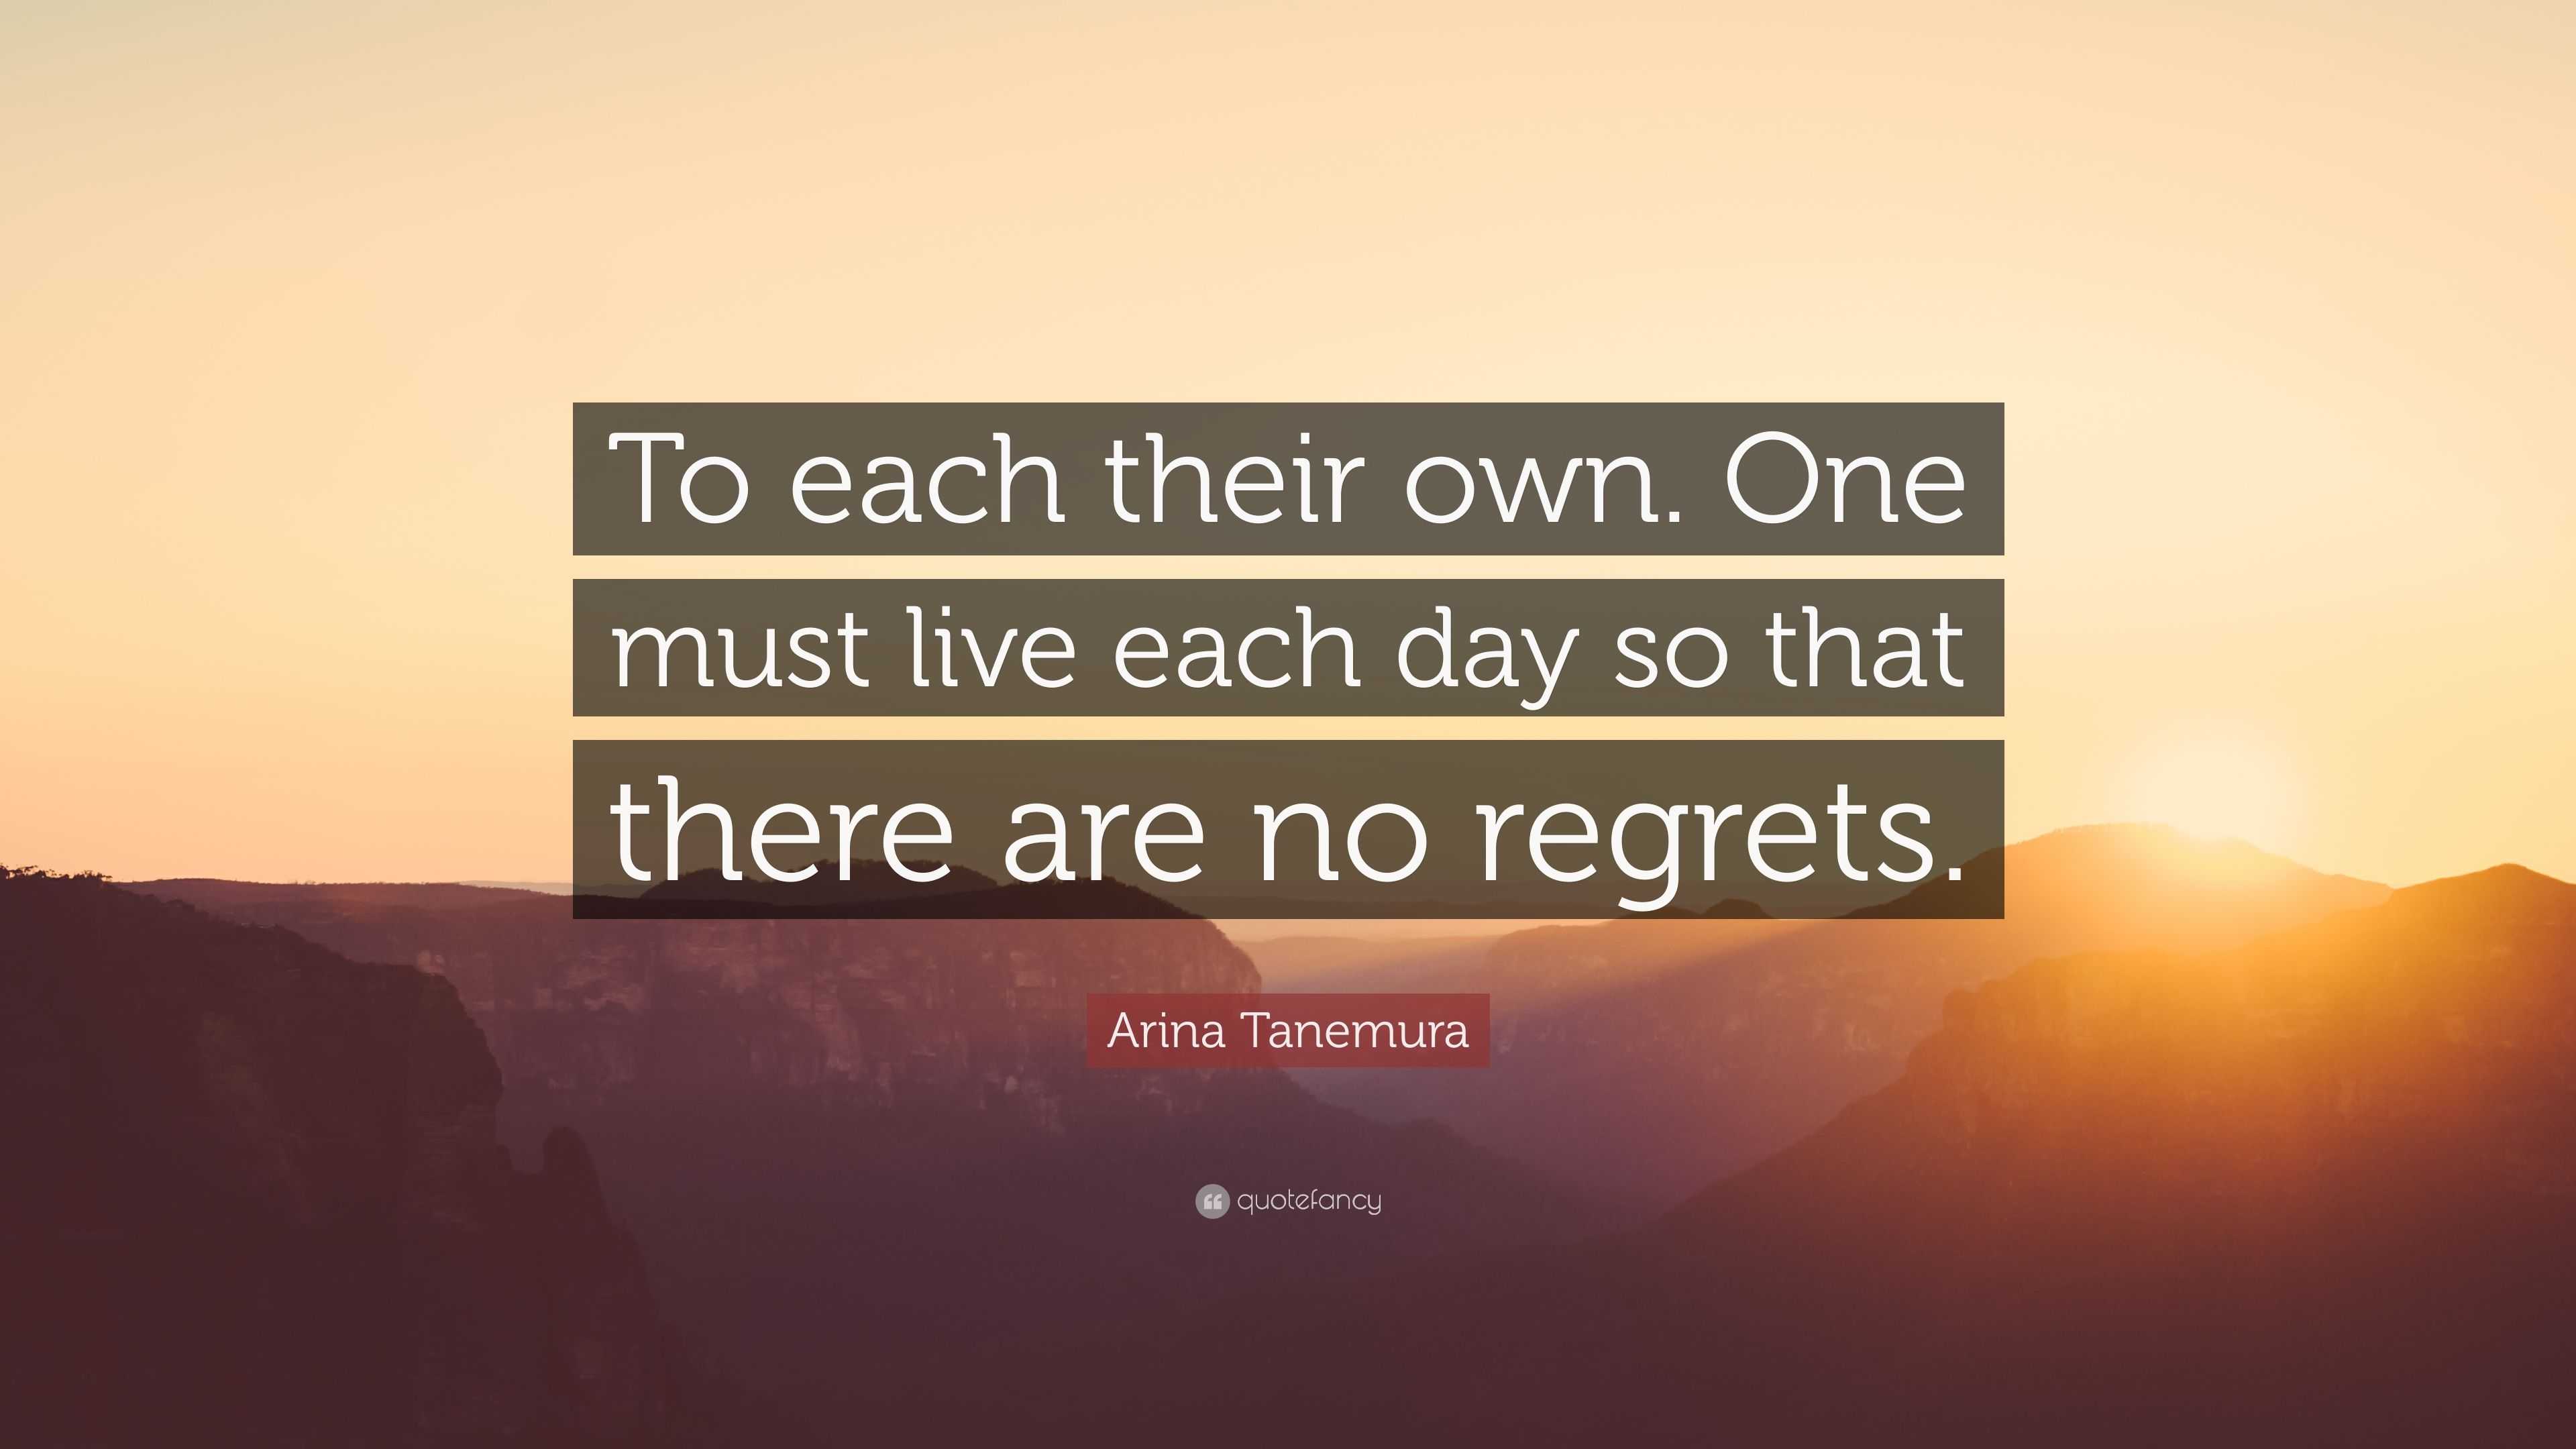 Arina Tanemura Quote: “To each their own. One must live each day